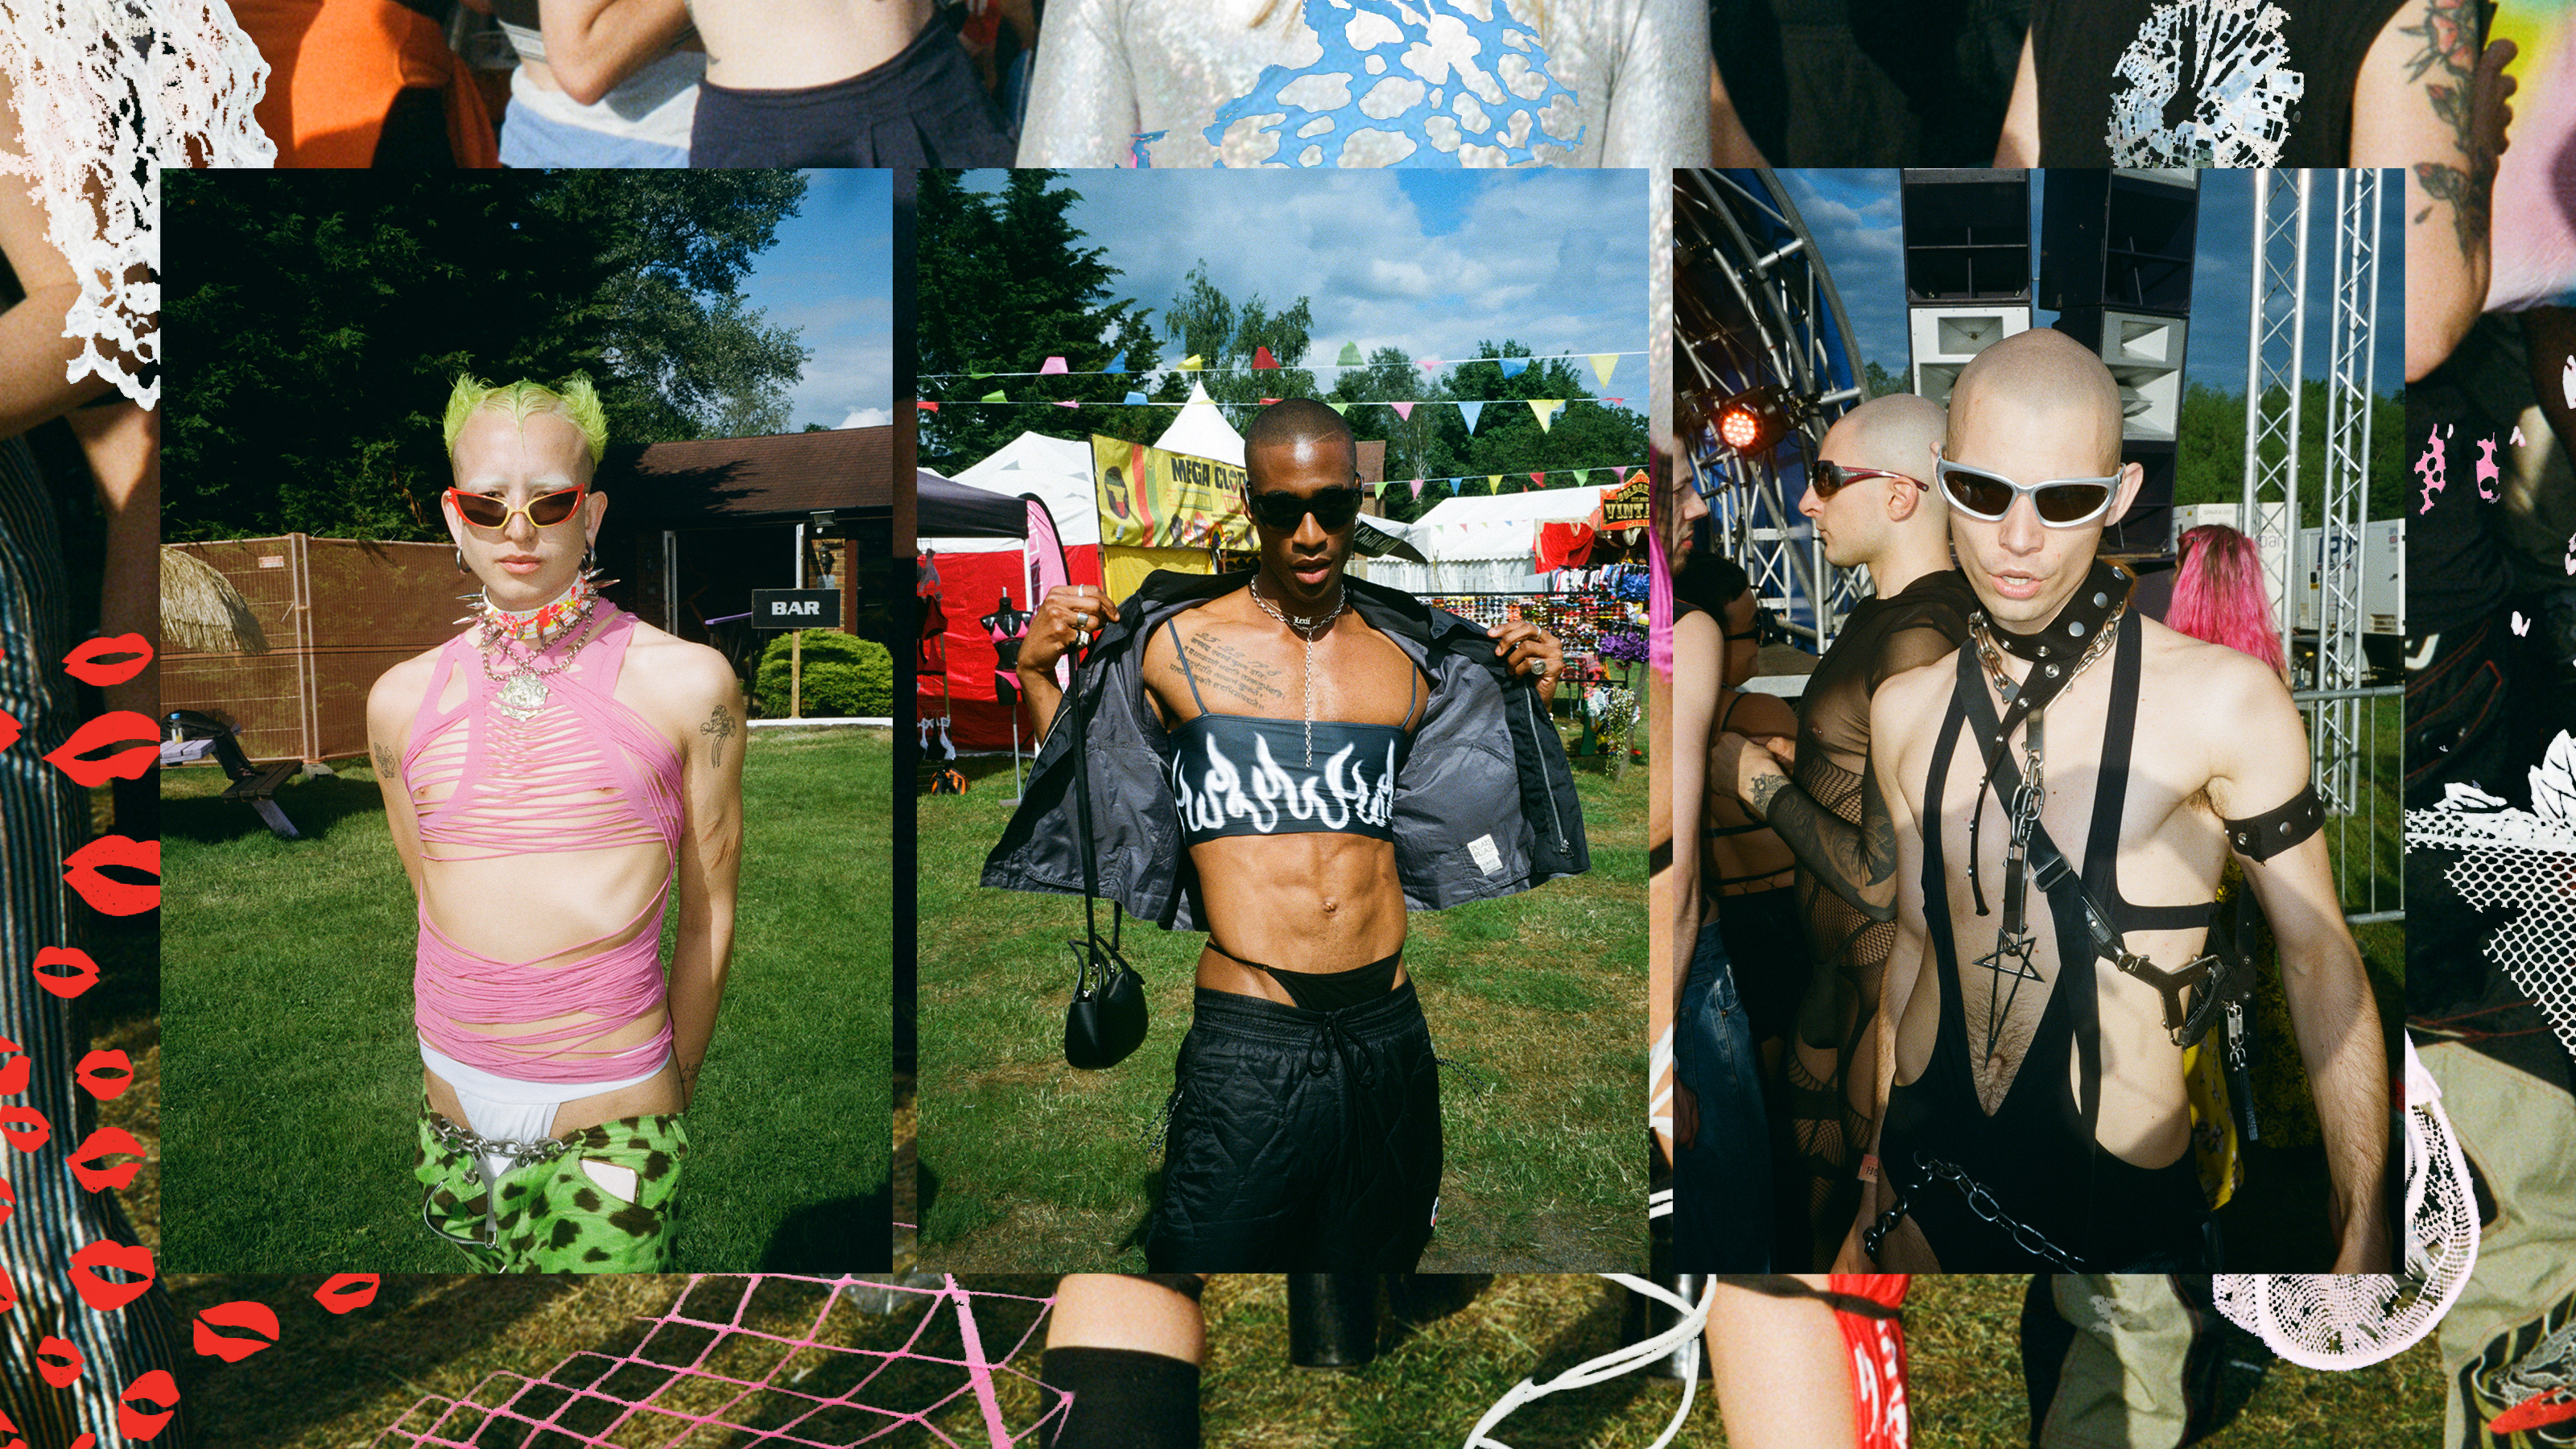 At Flesh, the UK's First Queer Camping Festival, the Focus Was on Intimacy